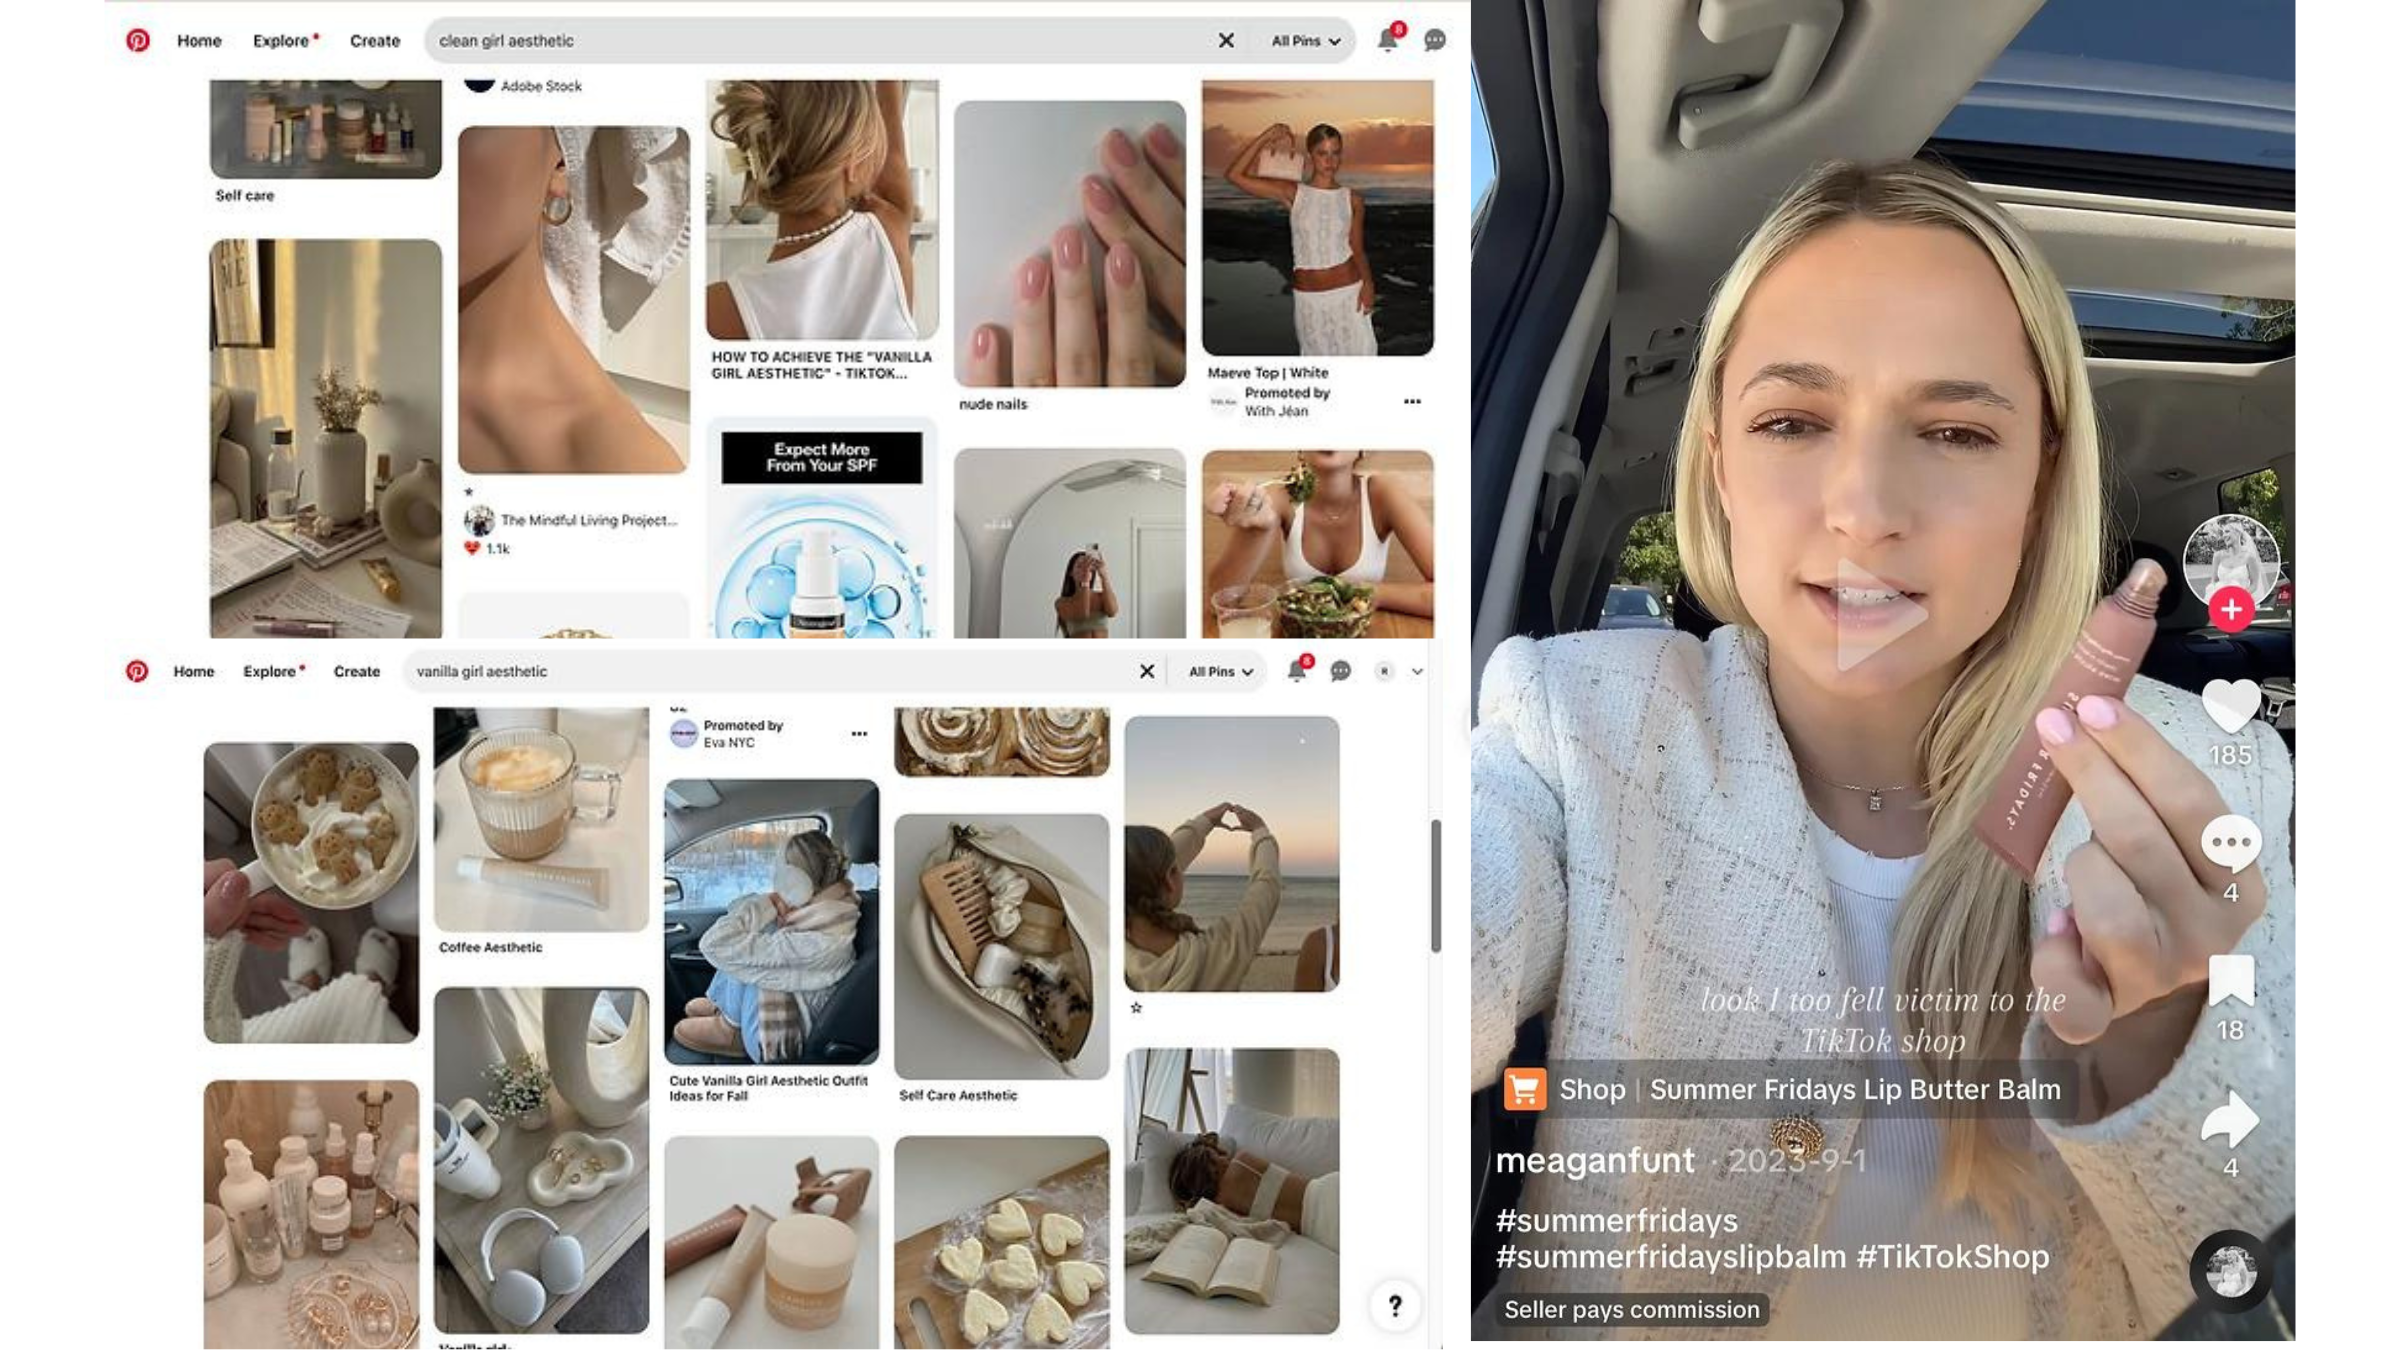 Collage of images of white women, nails, makeup, and jewelry from Pinterest. Screenshot of woman on TikTok.